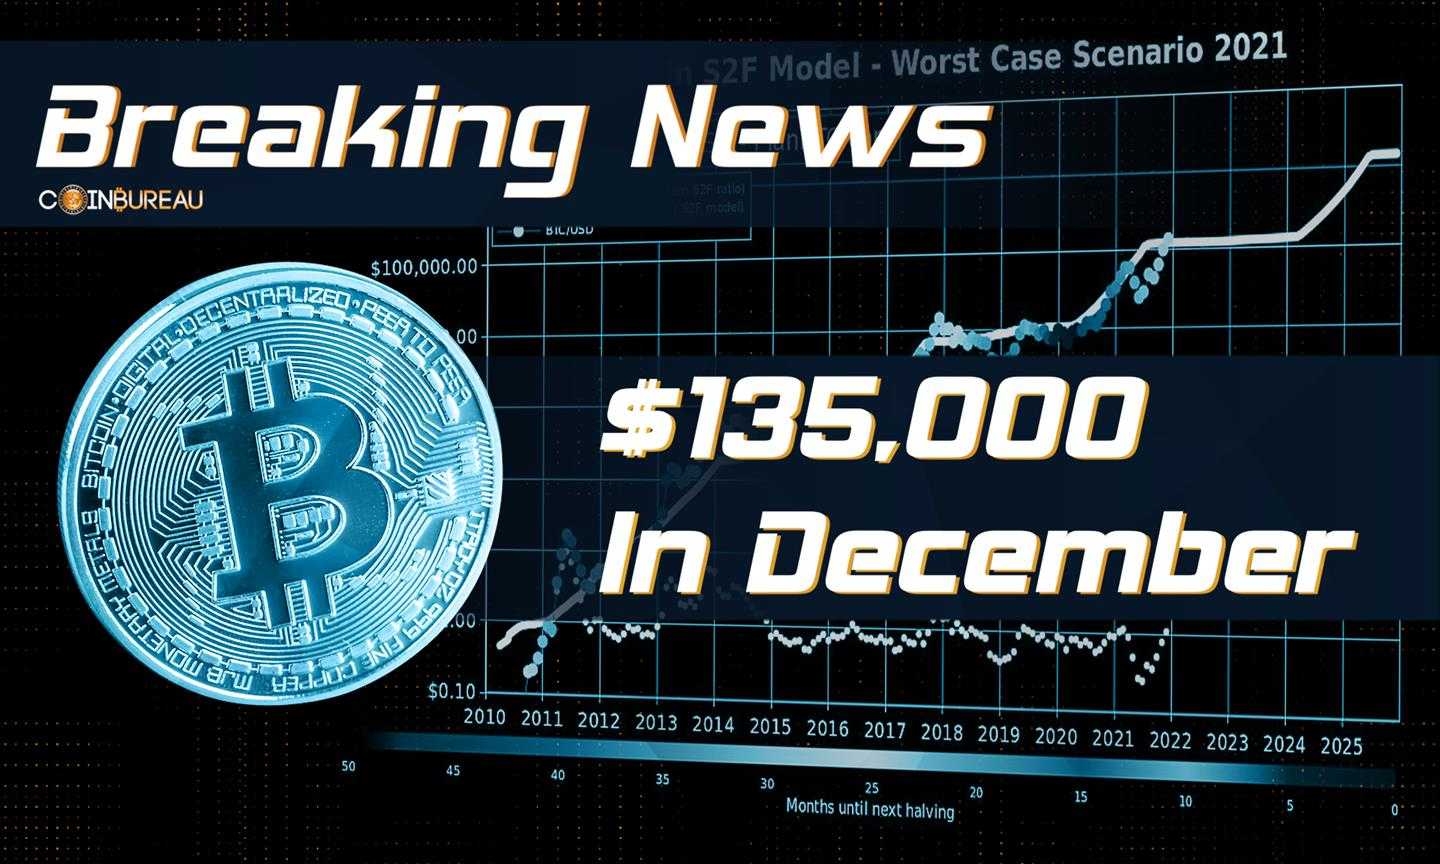 Bitcoin $135,000 In December? Crypto Analyst PlanB Gives An Update On Bull Market Projection